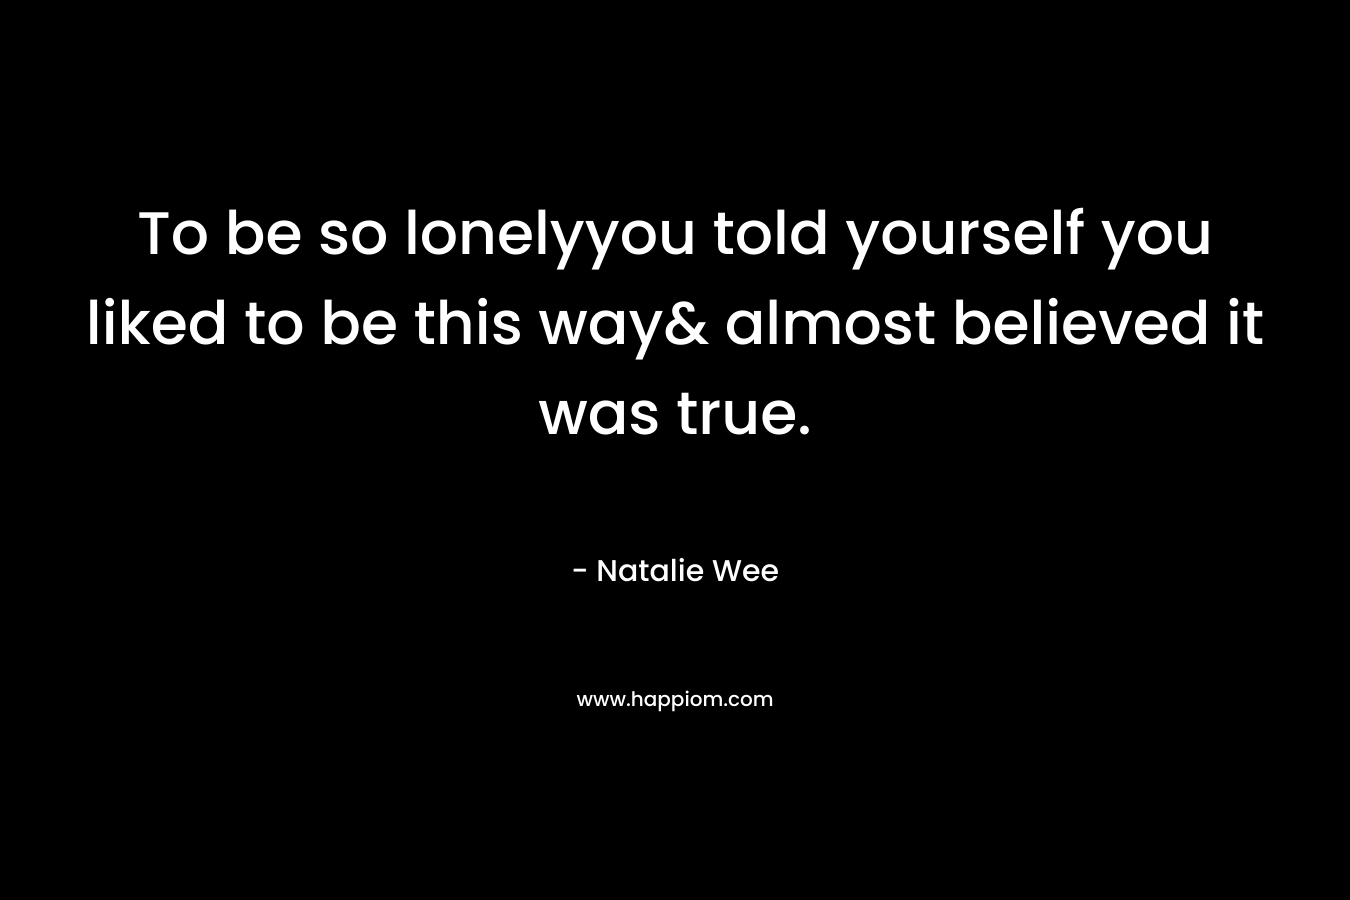 To be so lonelyyou told yourself you liked to be this way& almost believed it was true.